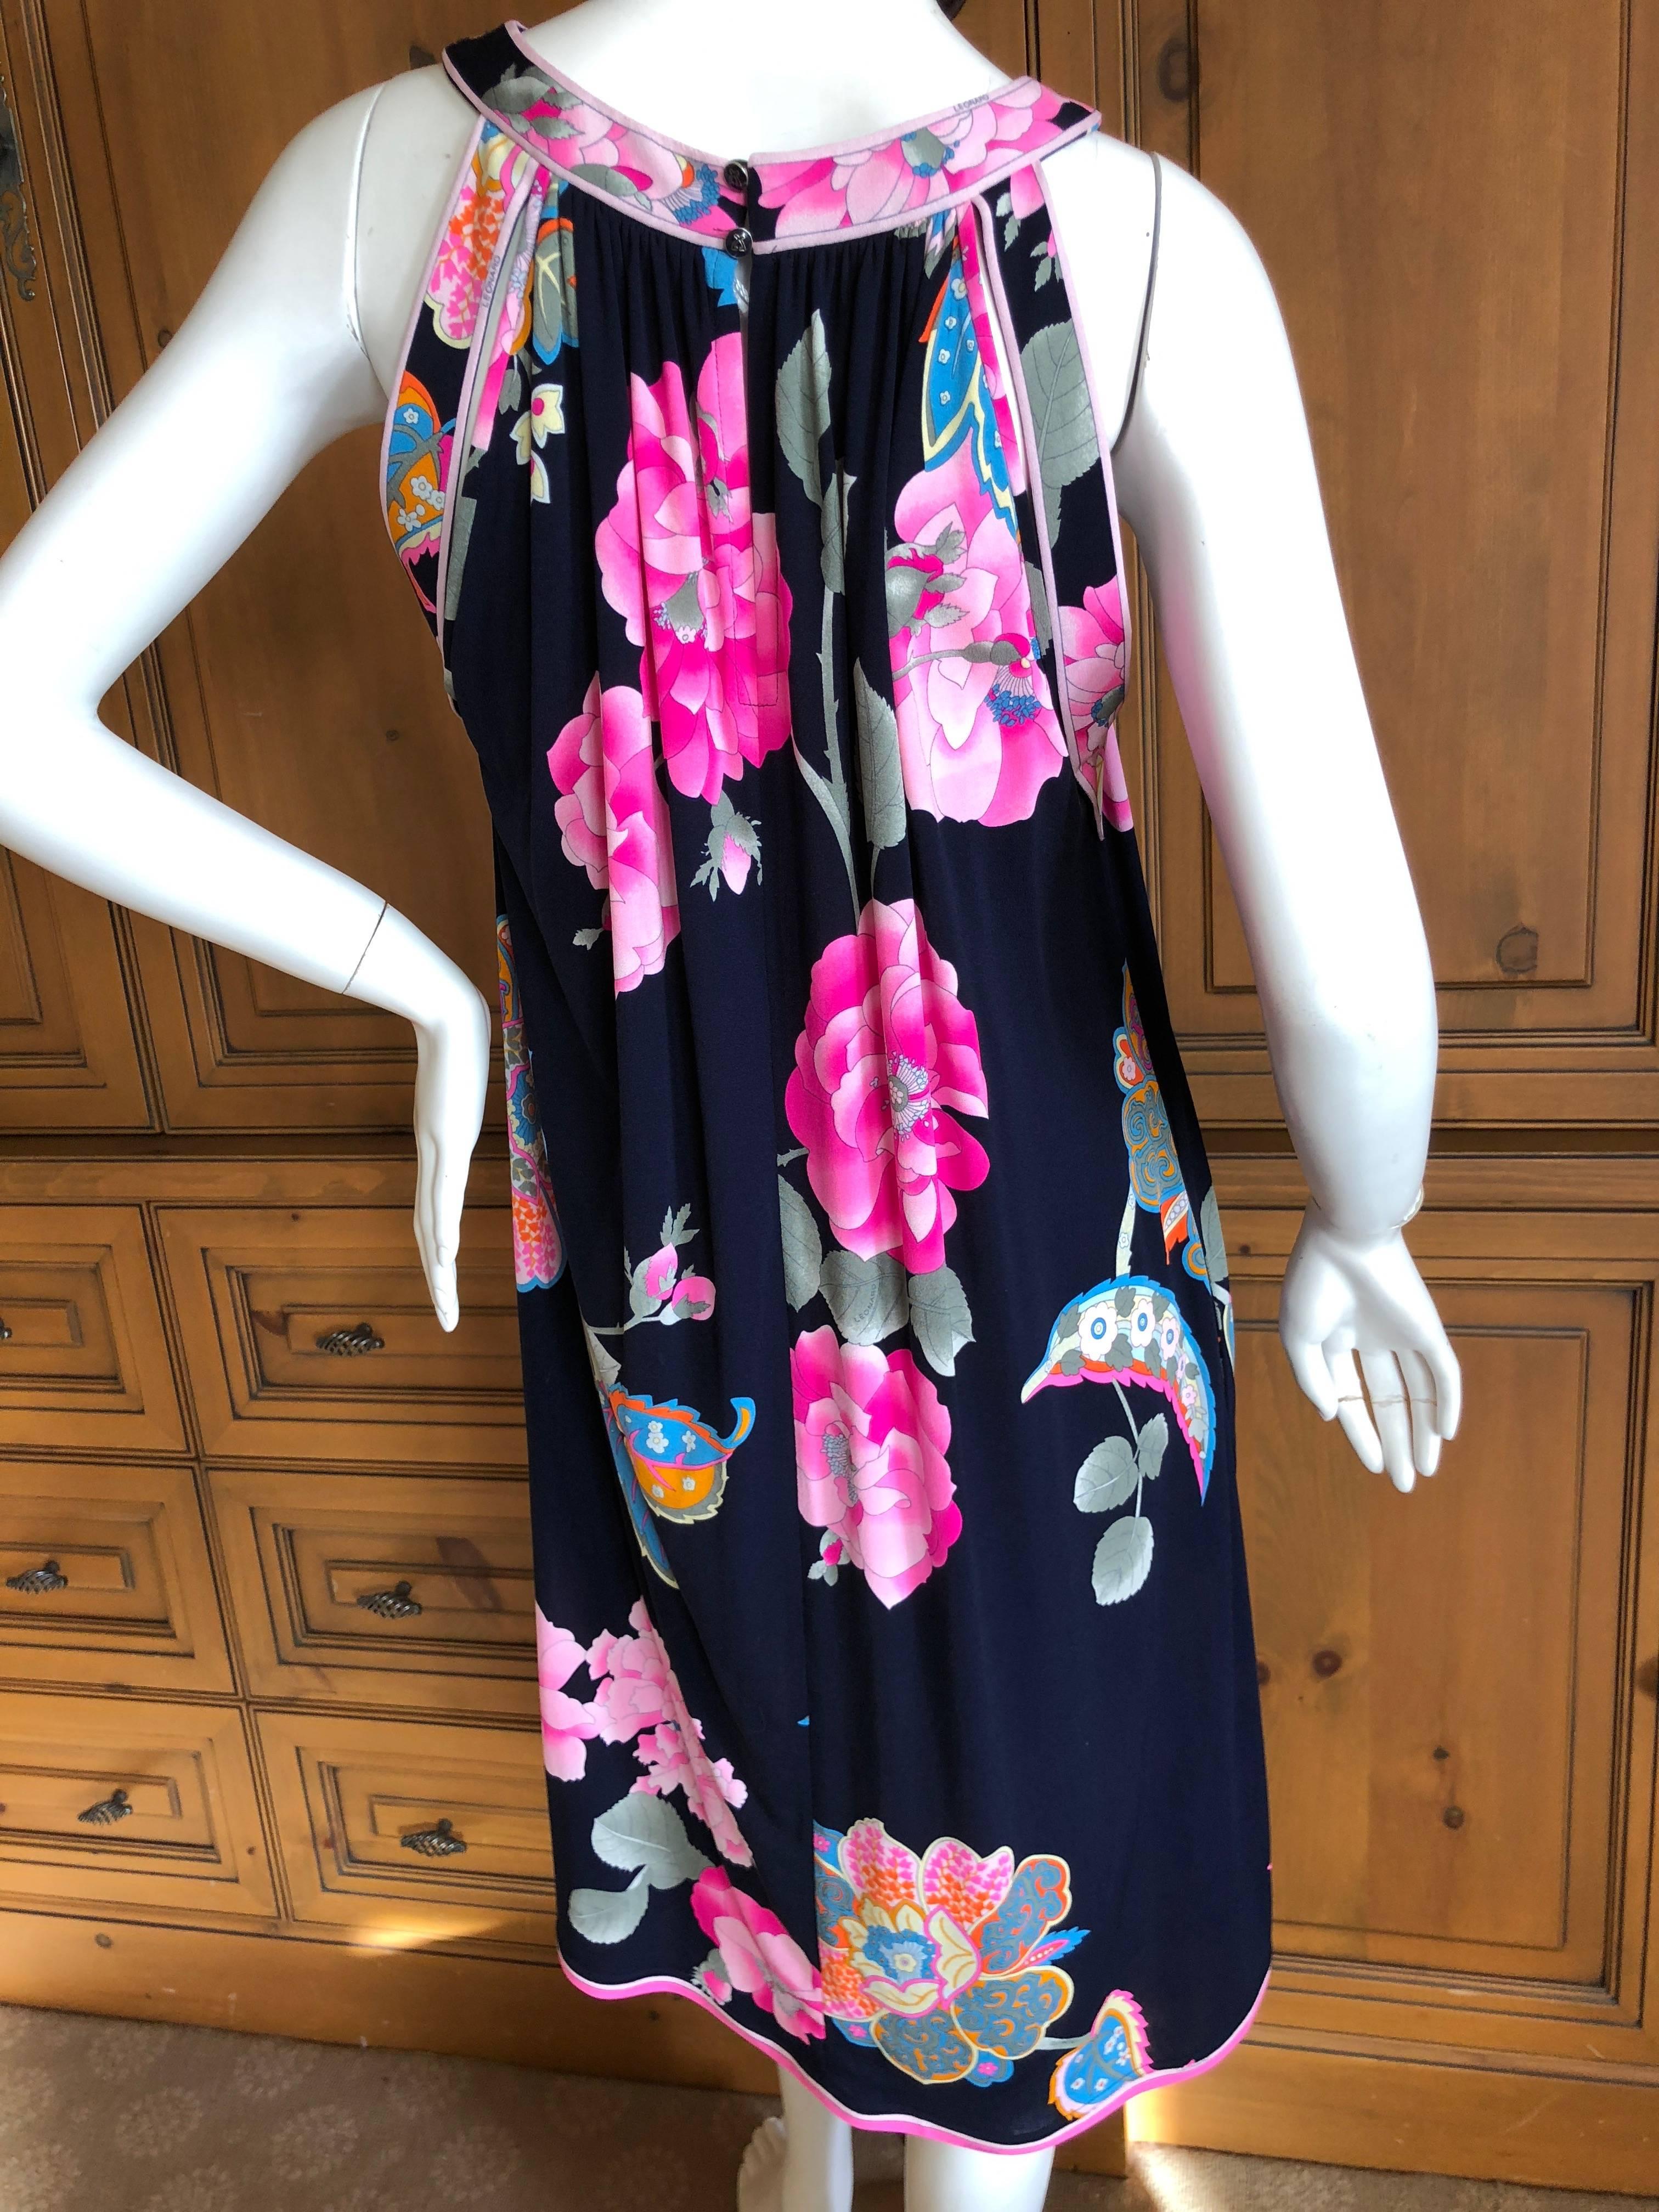 Leonard Paris Silk Jersey Sultan Print Maternity Dress New with Tags In Excellent Condition For Sale In Cloverdale, CA